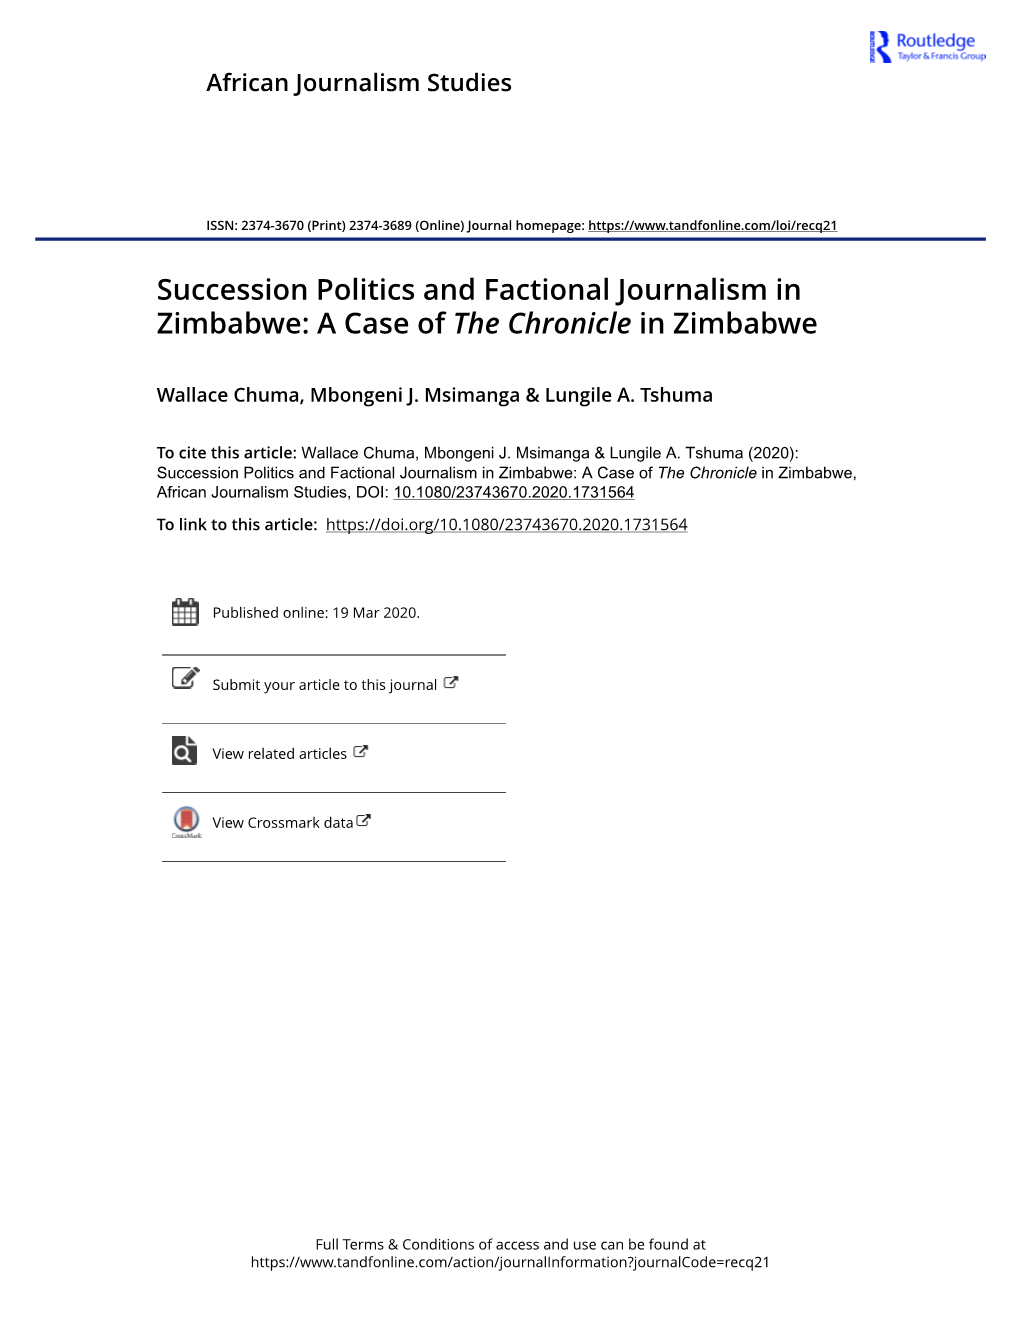 Succession Politics and Factional Journalism in Zimbabwe: a Case of the Chronicle in Zimbabwe